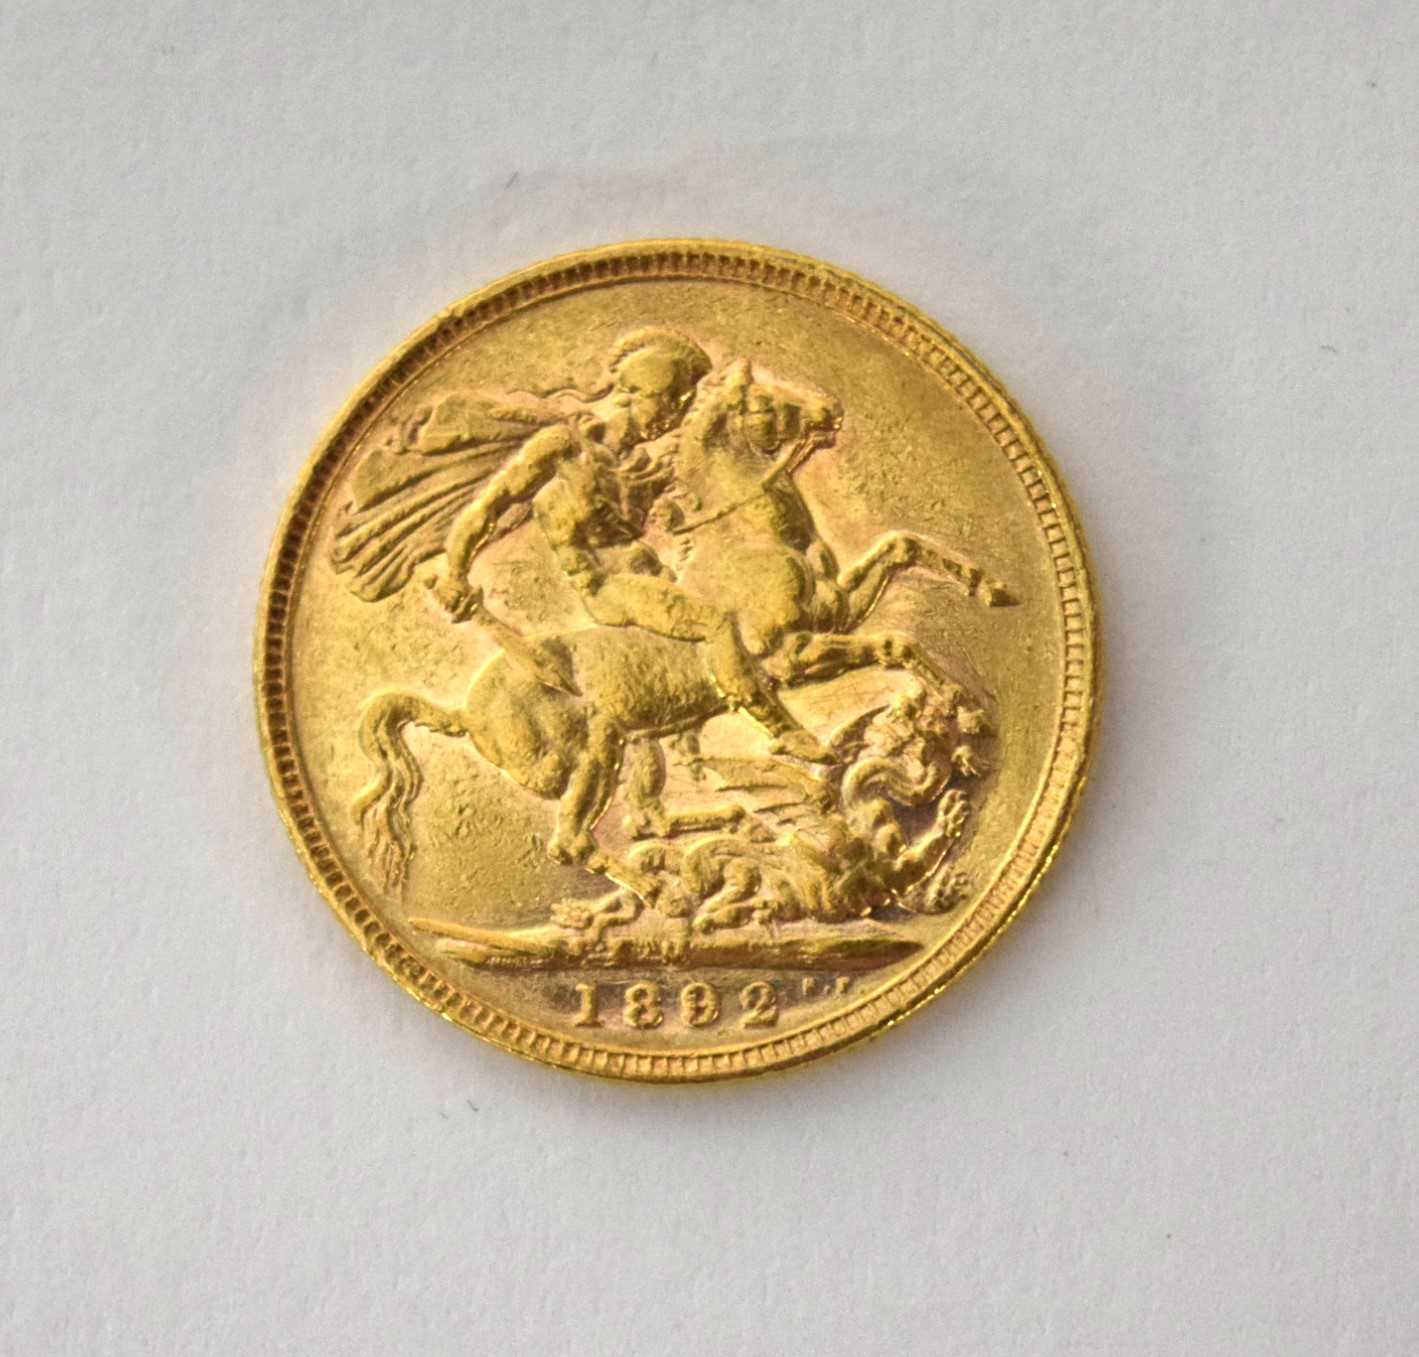 Queen Victoria 1892 gold sovereign - Image 2 of 2